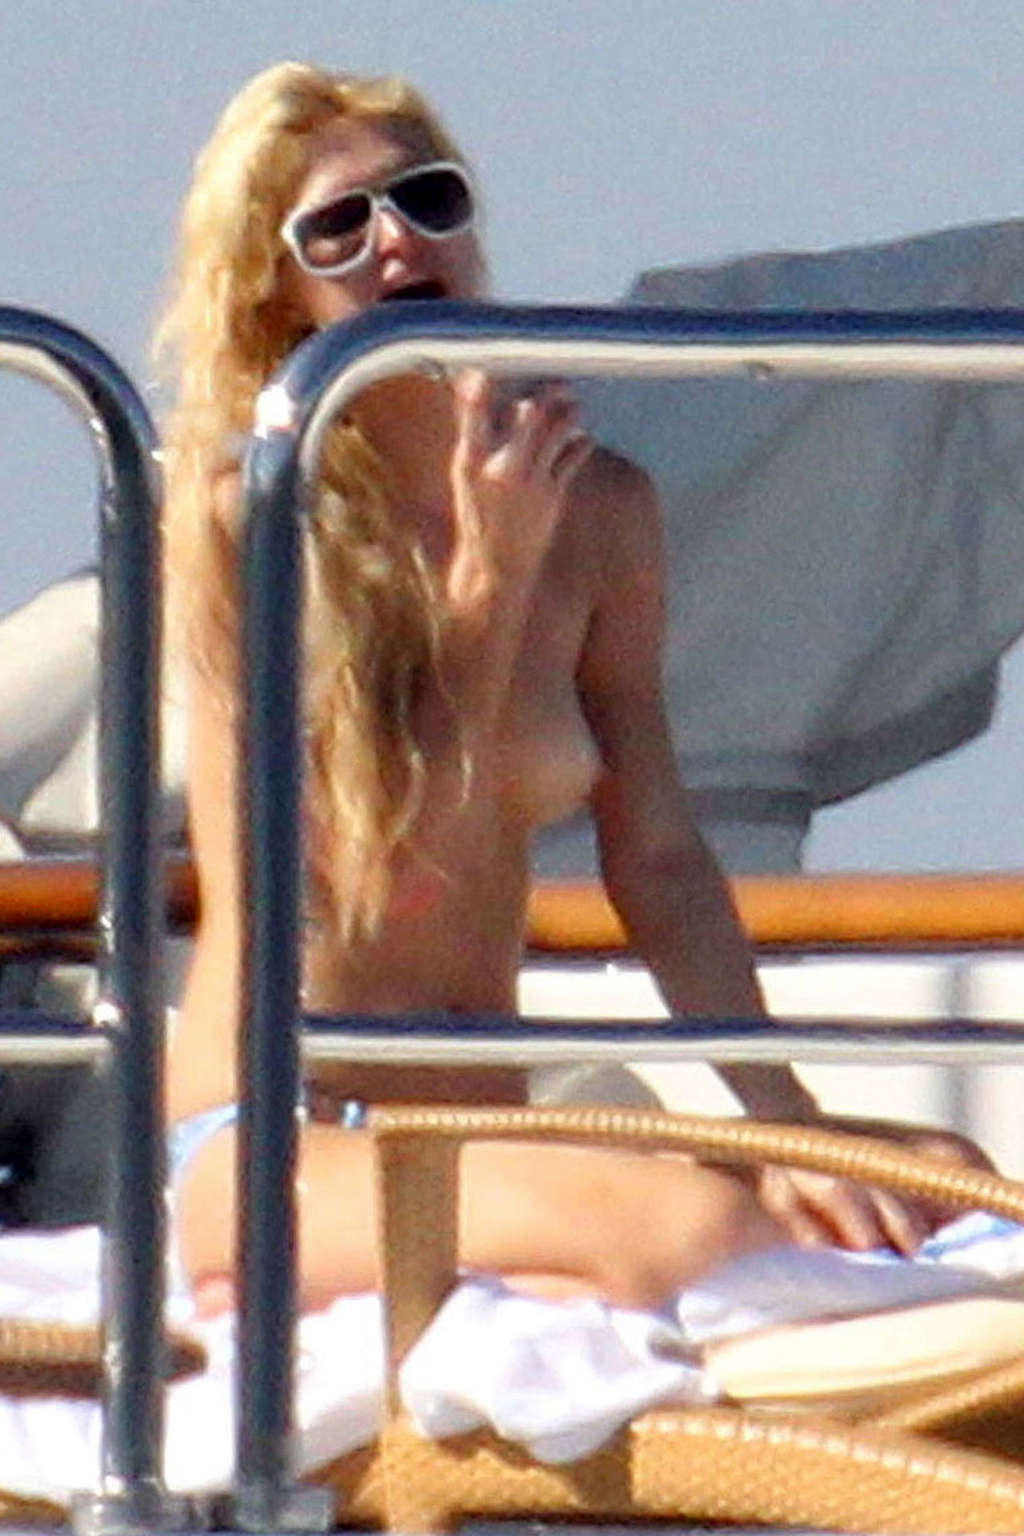 Paris Hilton Exposing Her Nice Tits While Sunbathing Topless On Yacht Paparazzi Porn Pictures